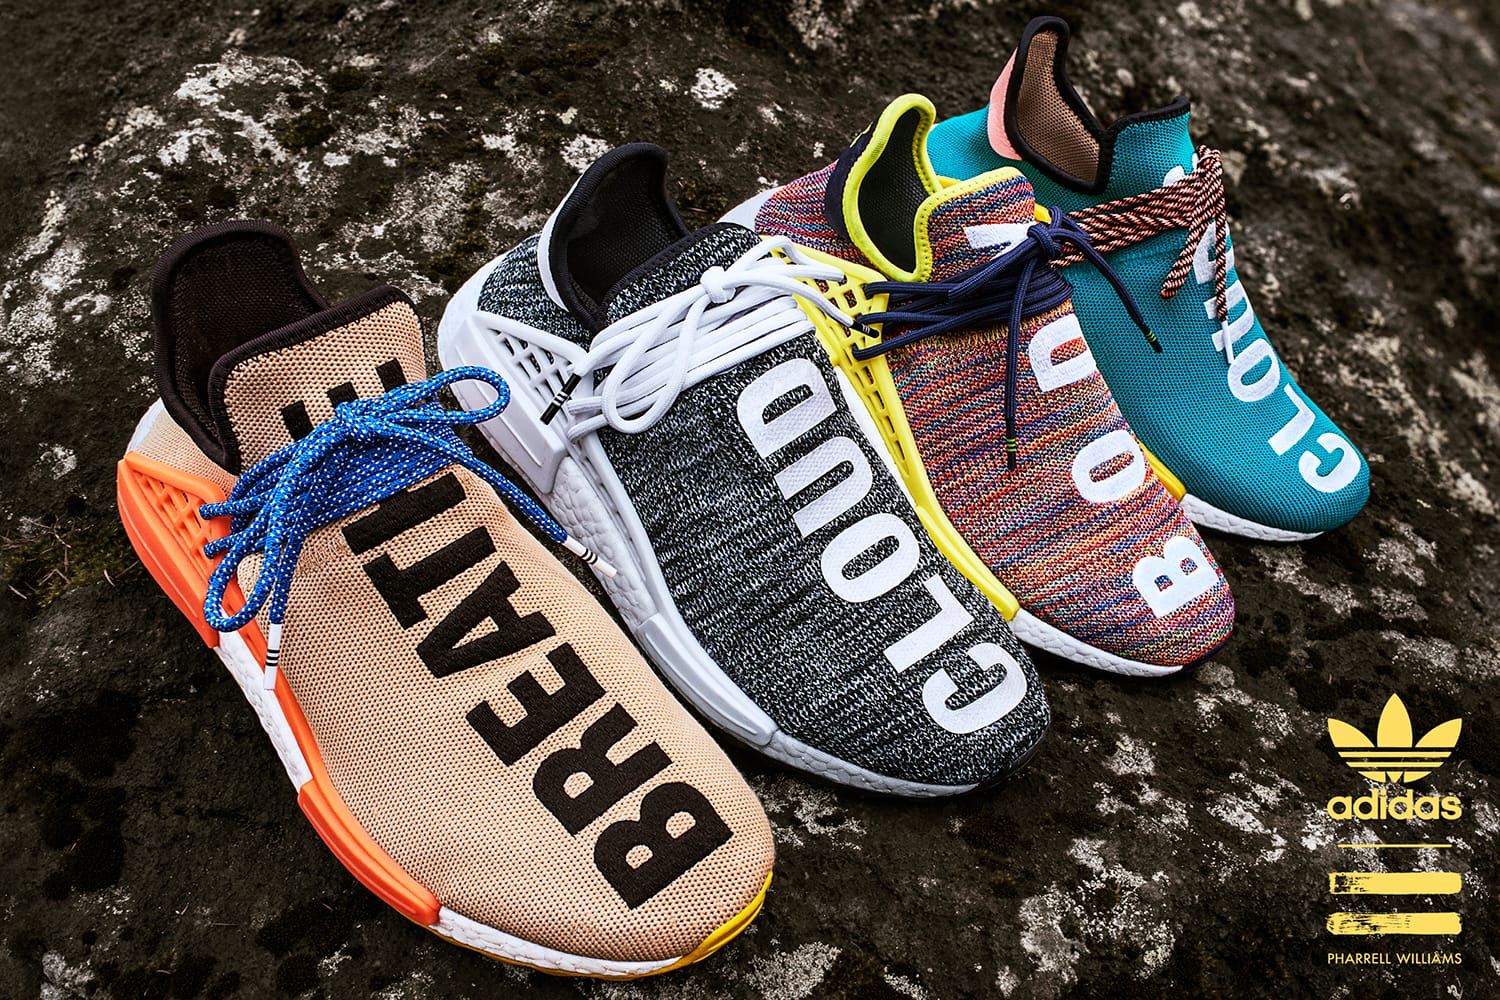 all human race nmd colorways